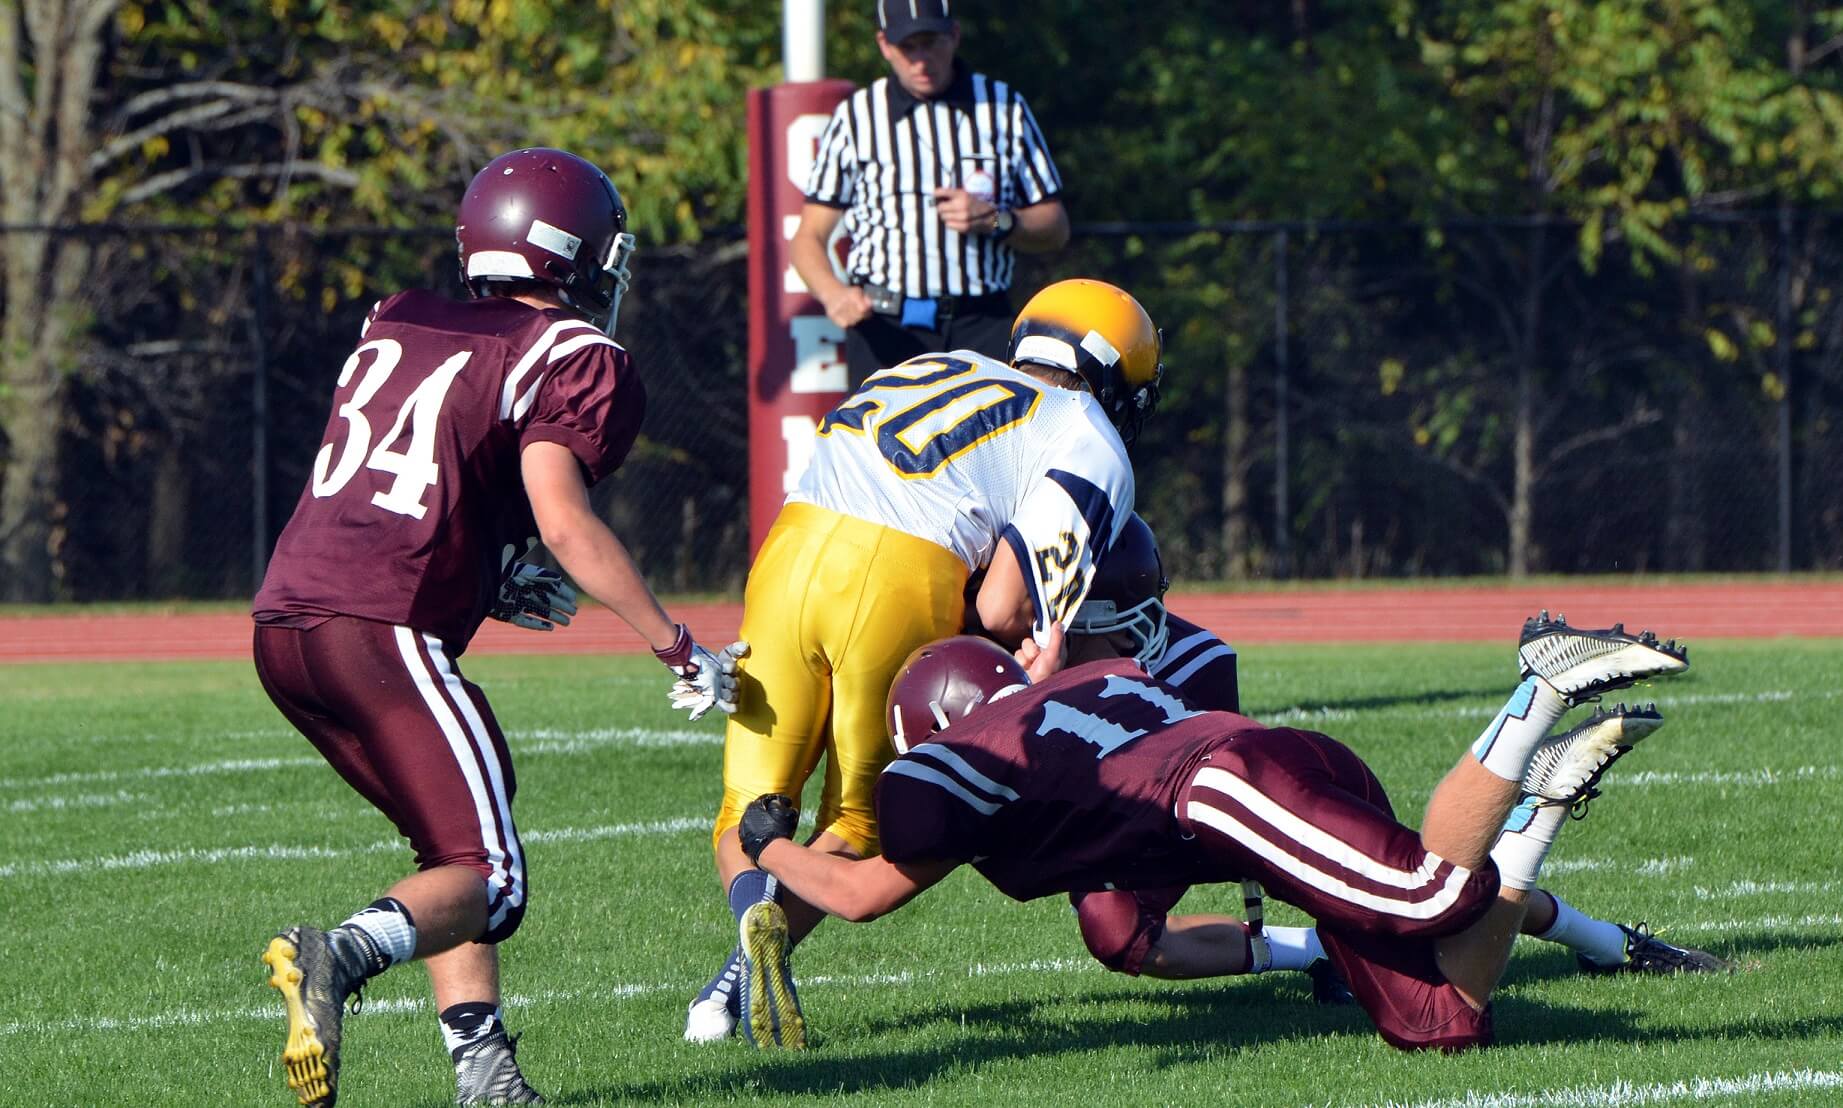 Football players making a tackle while referee watches